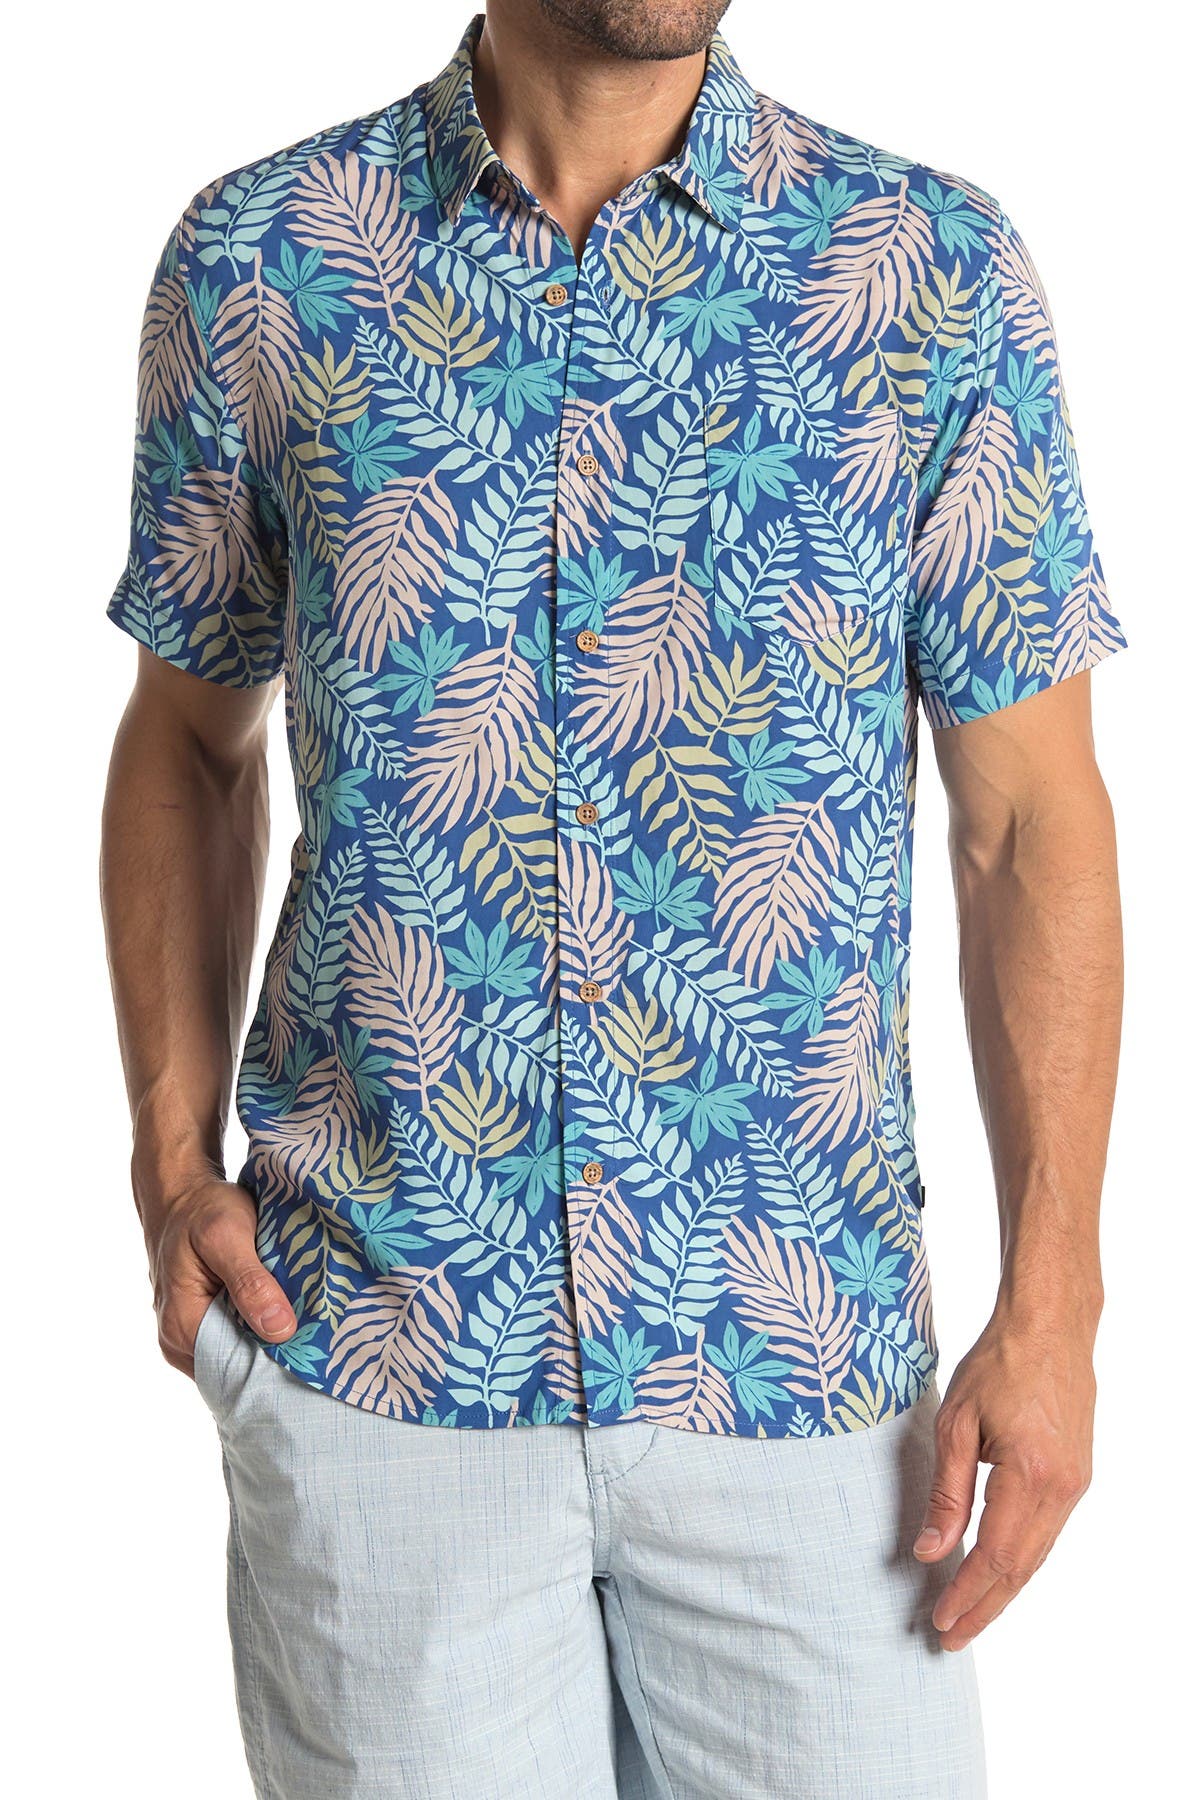 Union Denim Venice Short Sleeve Print Relaxed Fit Shirt In Liberty